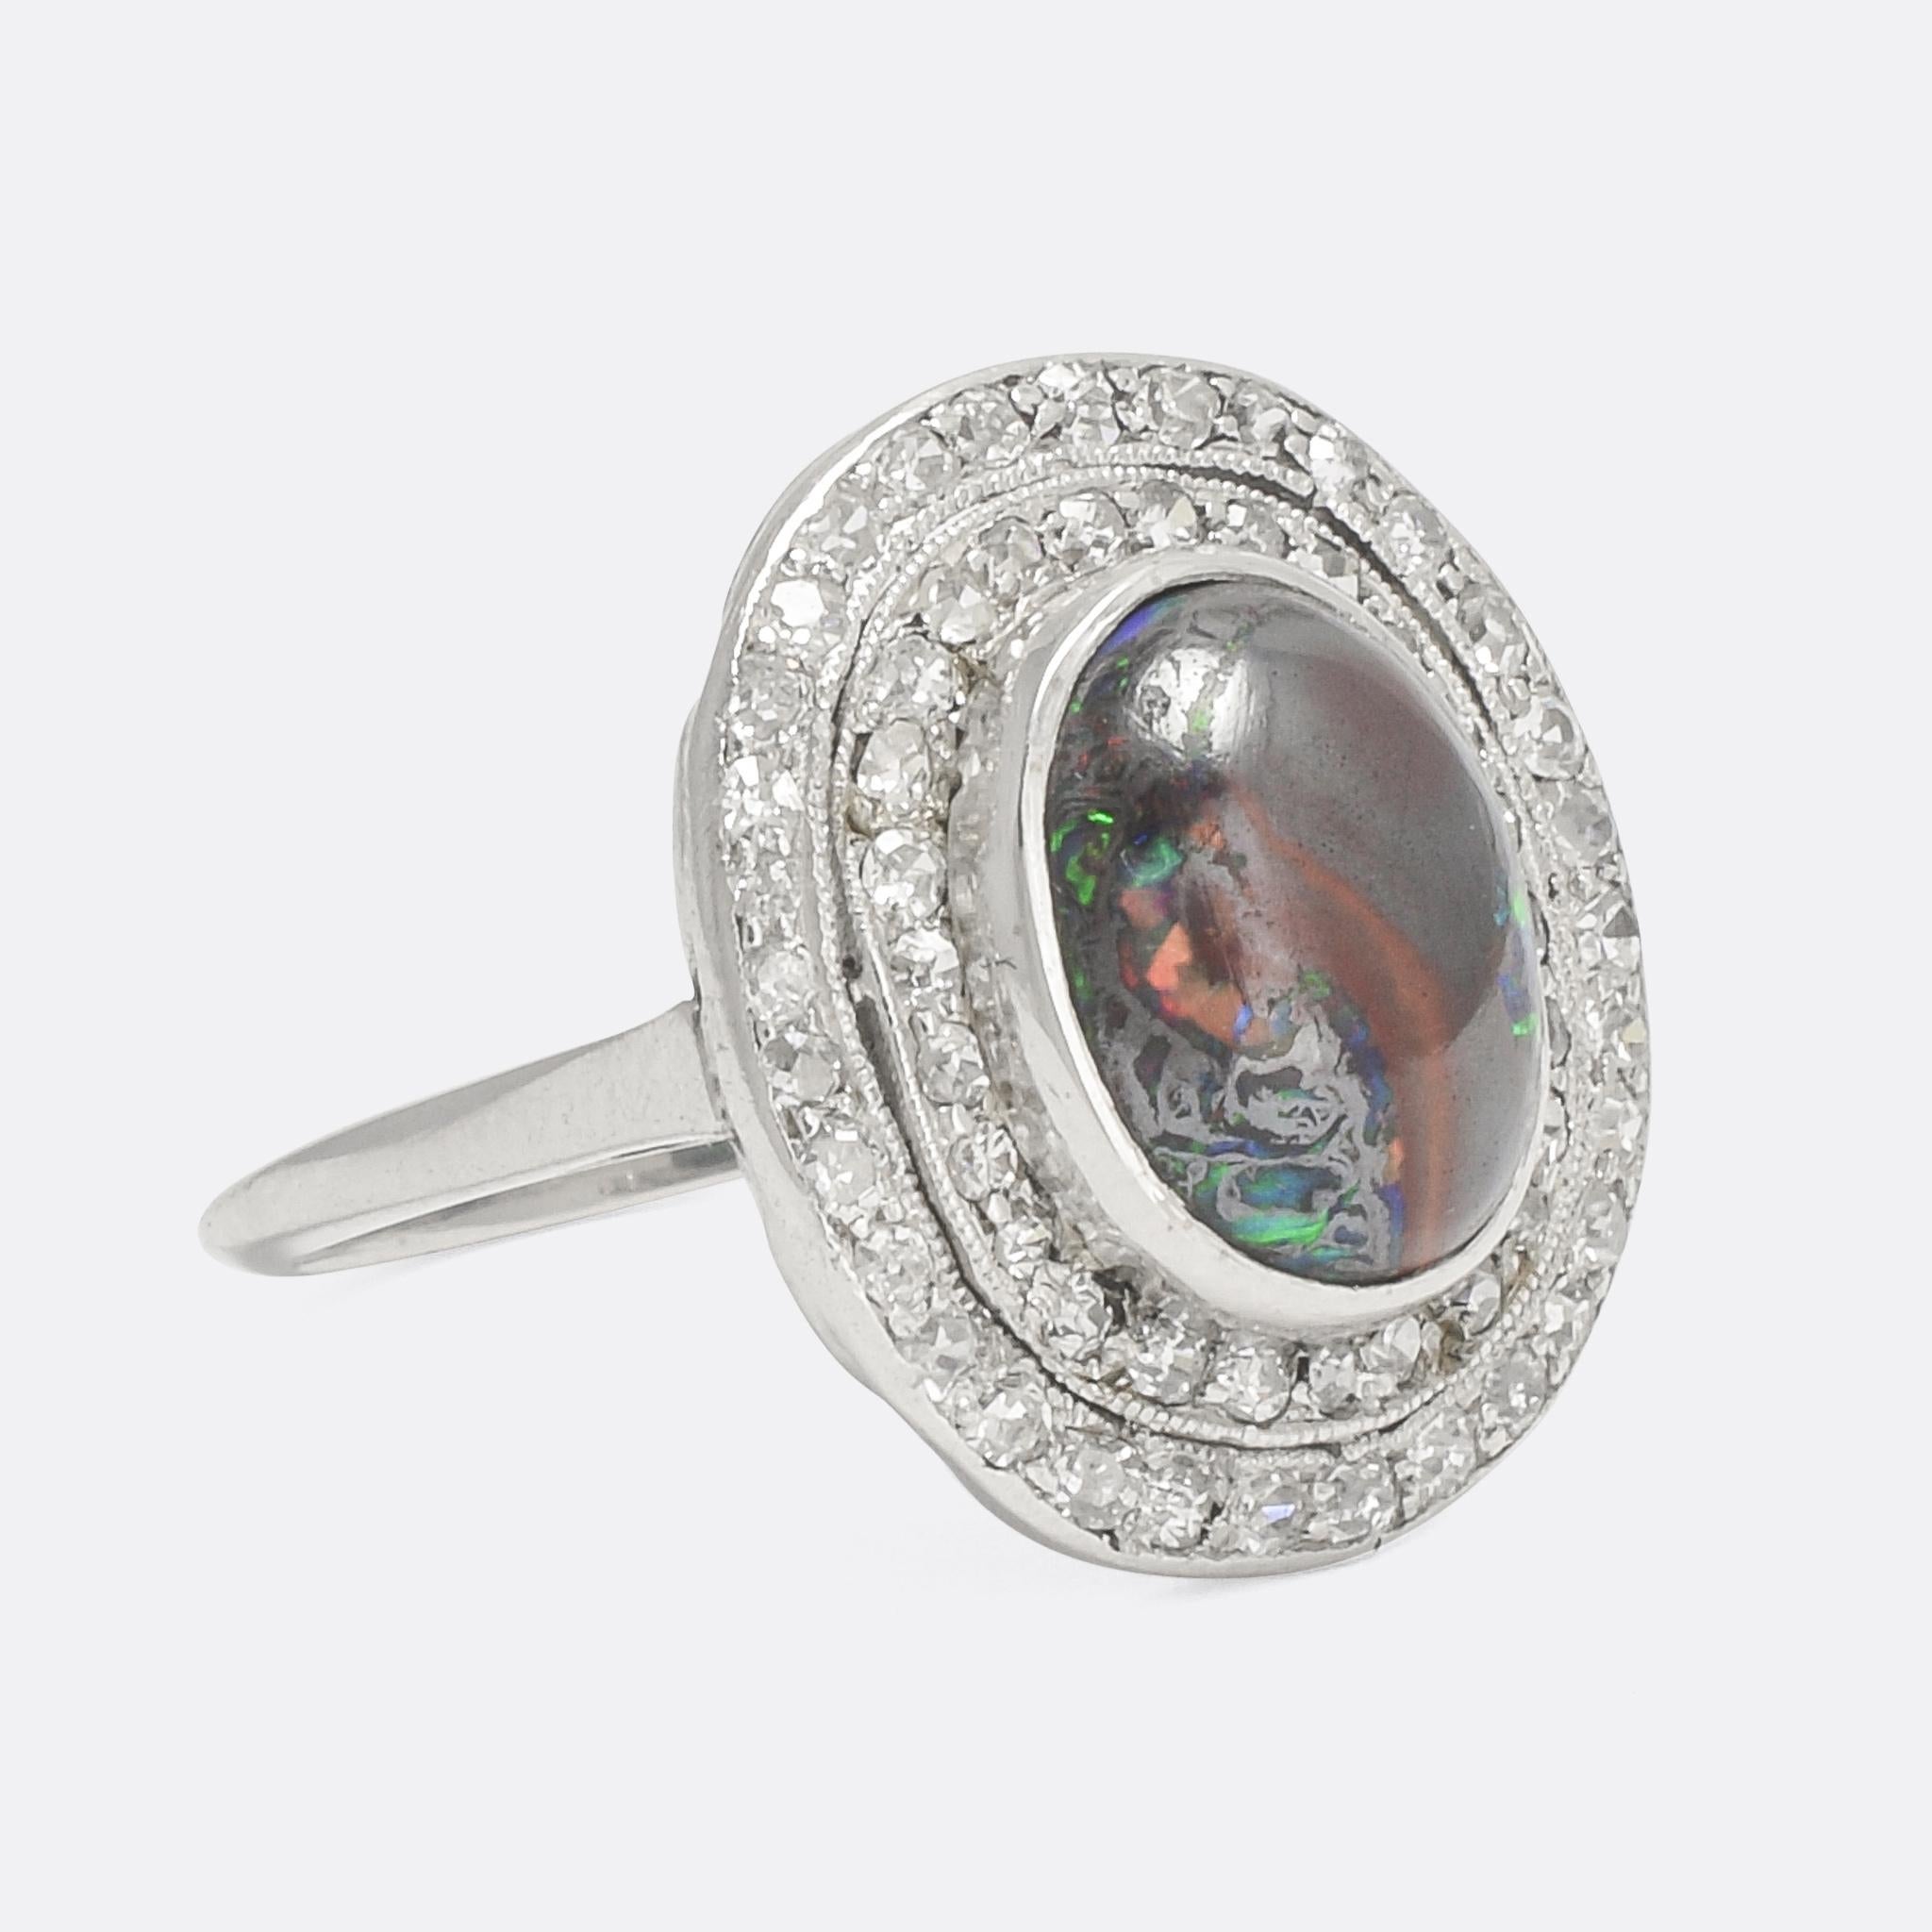 A spectacular Edwardian double halo ring set with a lively black opal in the centre. The stone displays vivid flashes of red, blue, green and orange, with a subtle red streak down the middle. Modelled in platinum throughout with an openworked